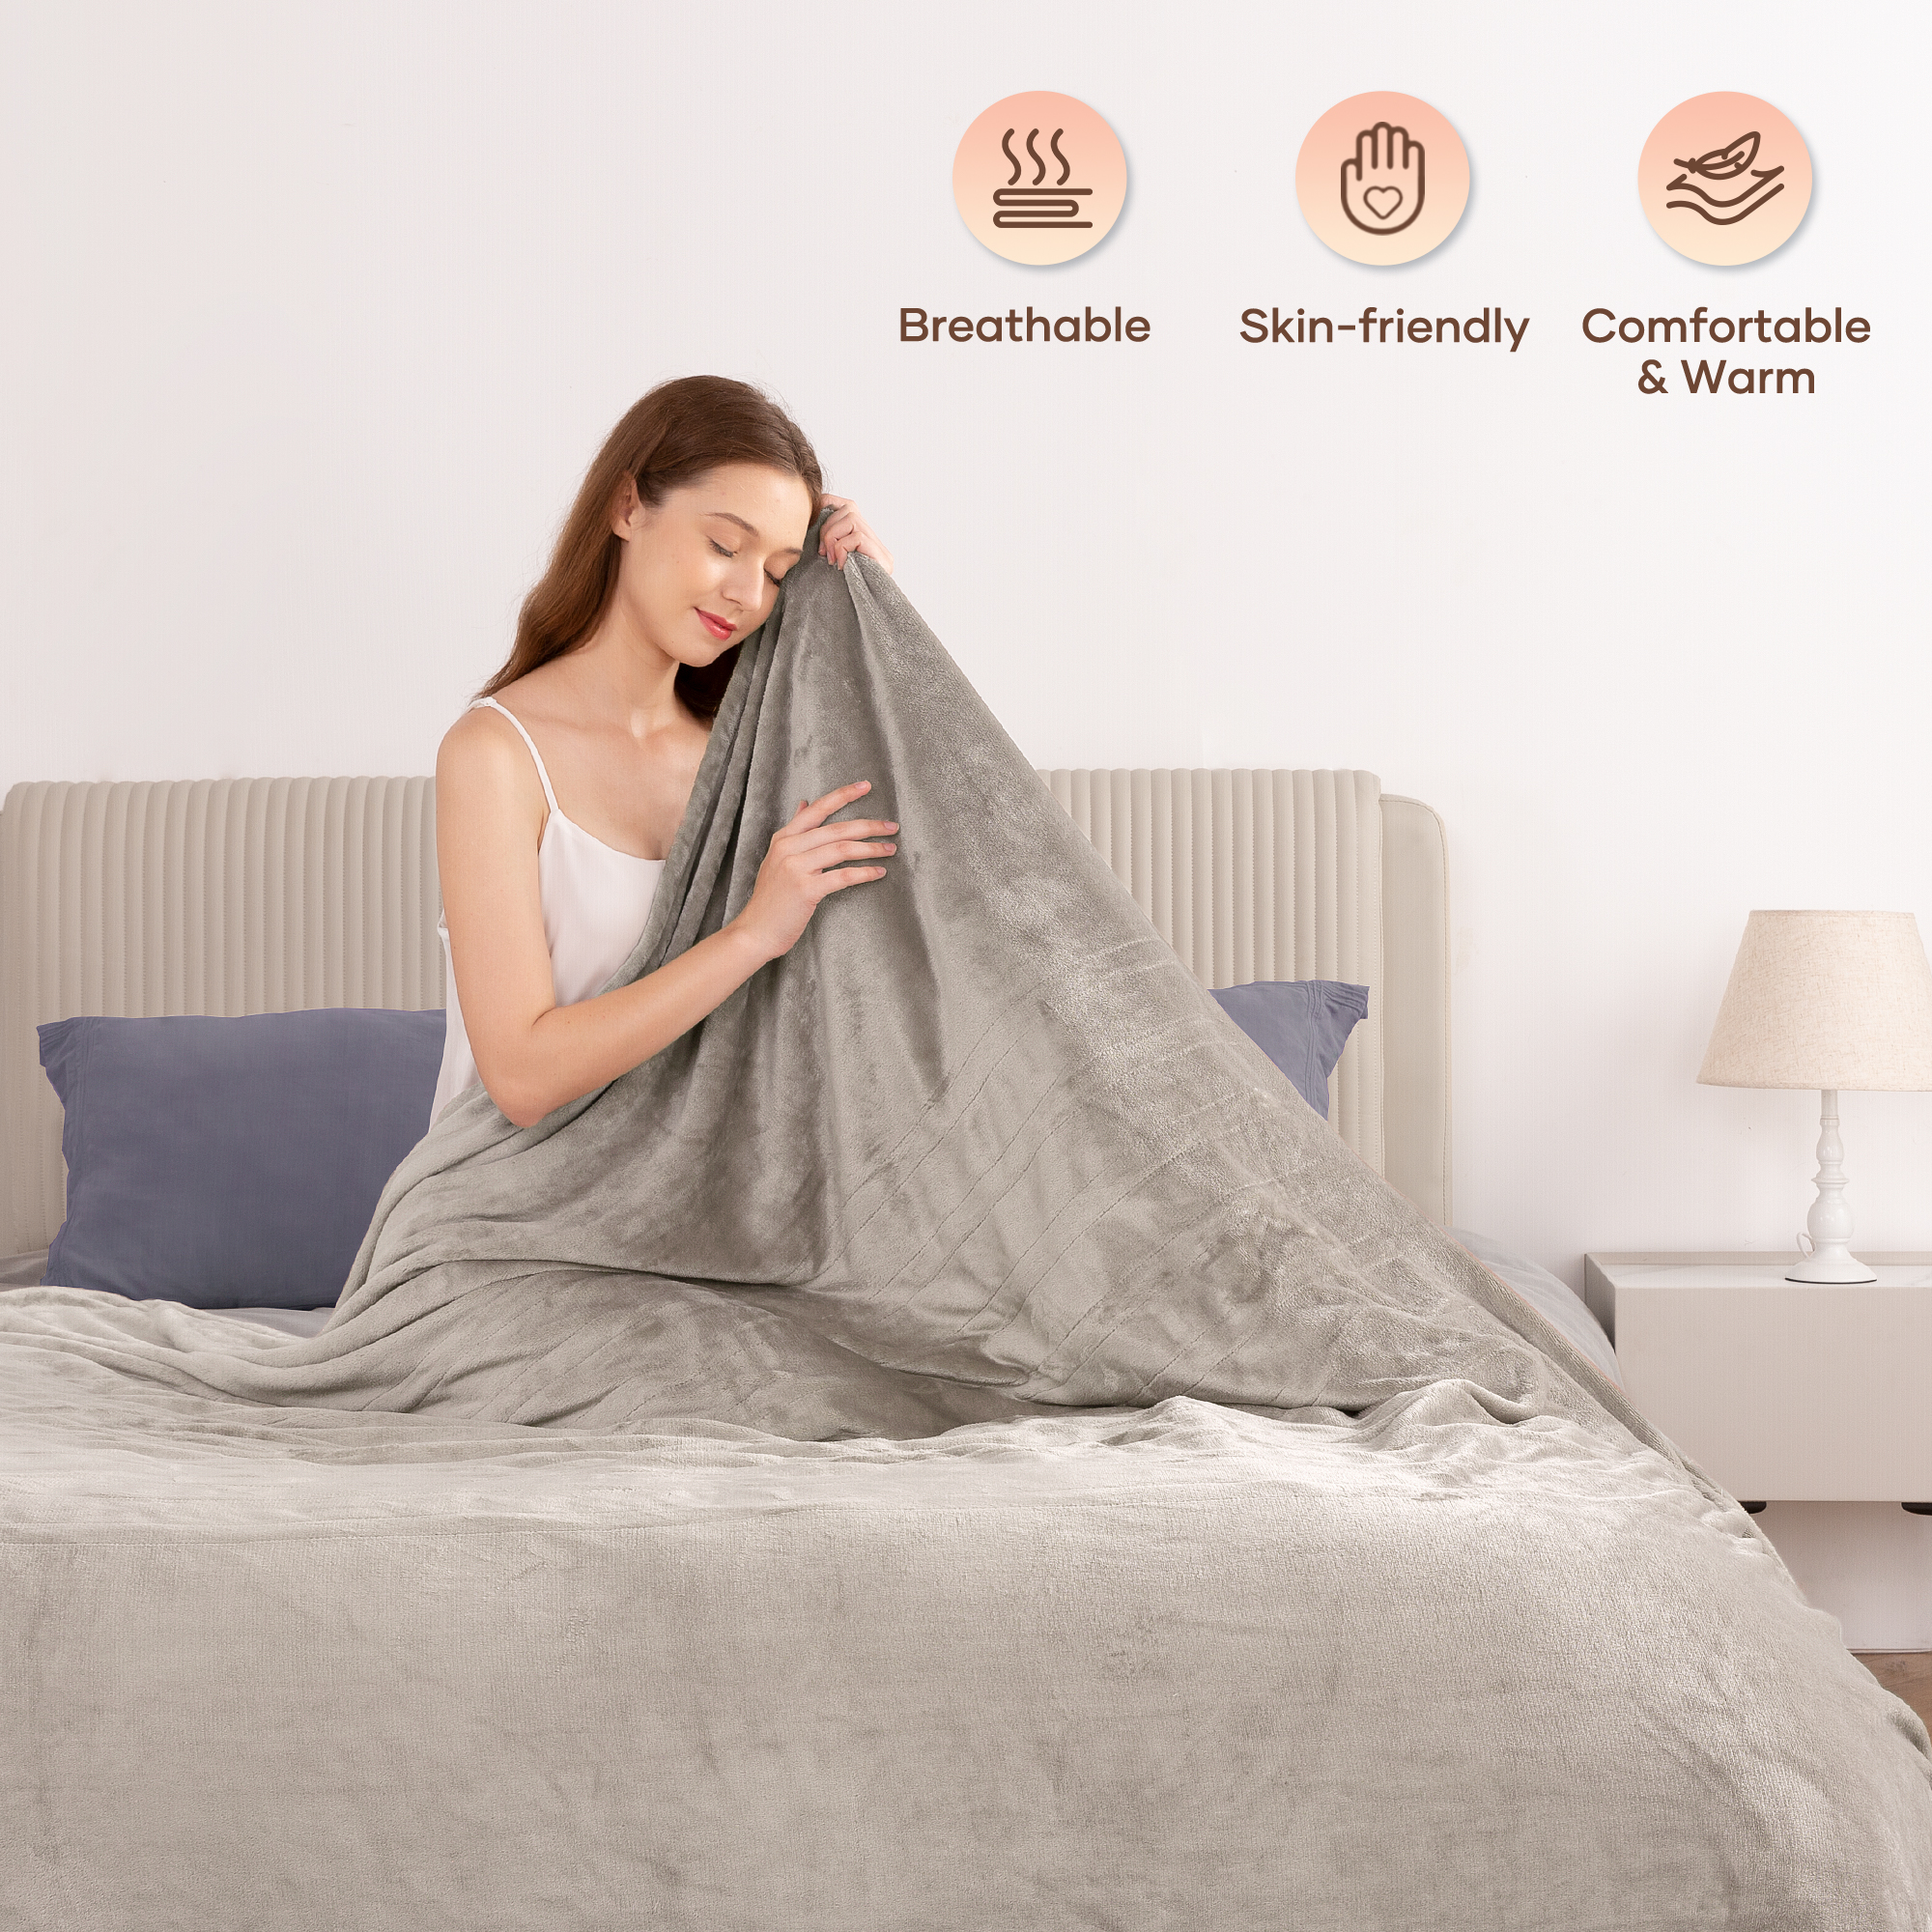 MARNUR Electric Blanket 72" x 84" Full Size Heated Blanket, Fast Heating, 4 Heating Levels, 10H Auto-off, Machine Washable - Linen - image 5 of 13